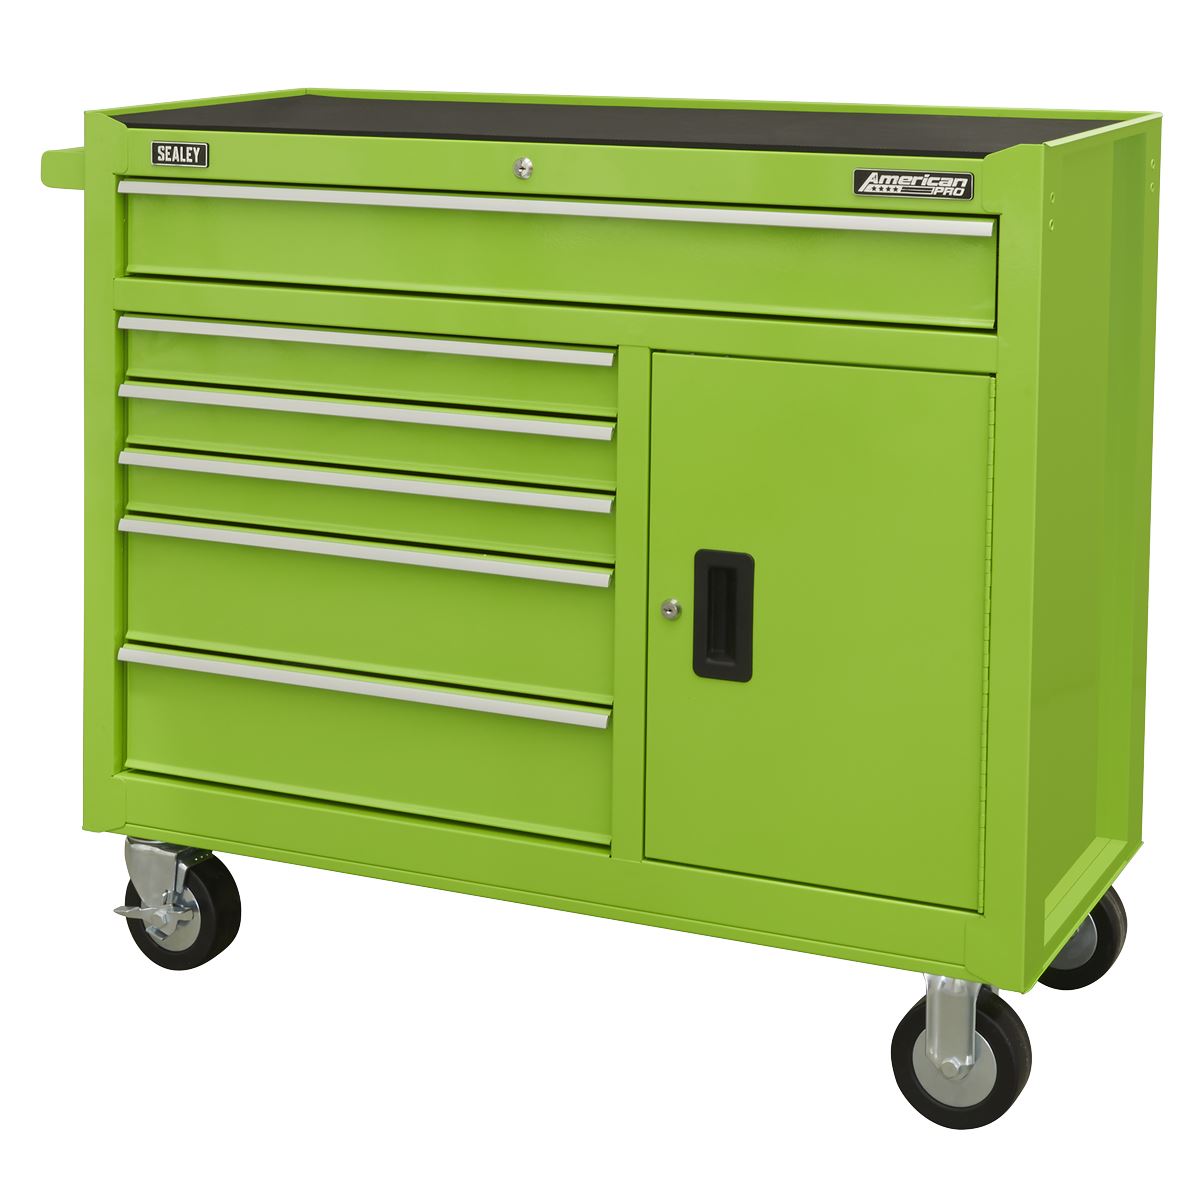 Sealey American Pro Rollcab 6 Drawer with Ball Bearing Slides - Green